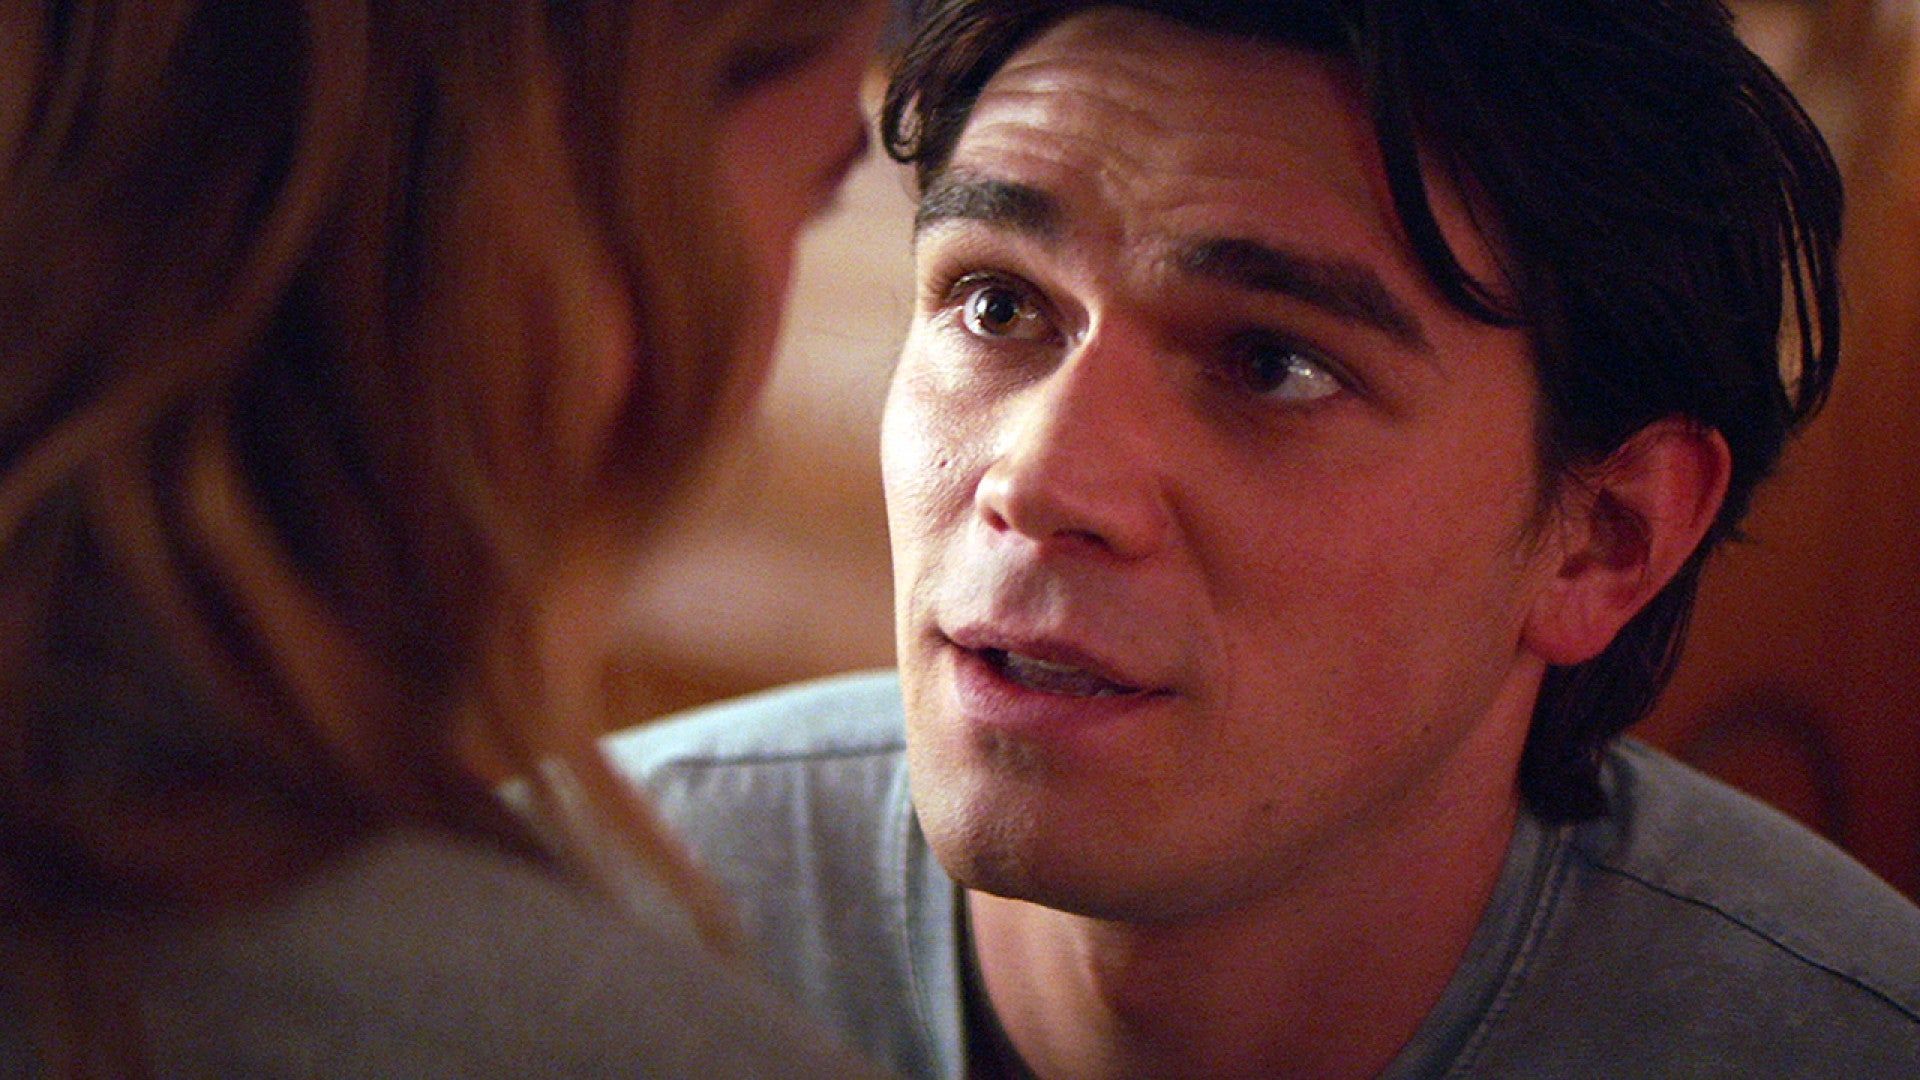 Watch KJ Apa Propose to Britt Robertson in an Exclusive Clip From